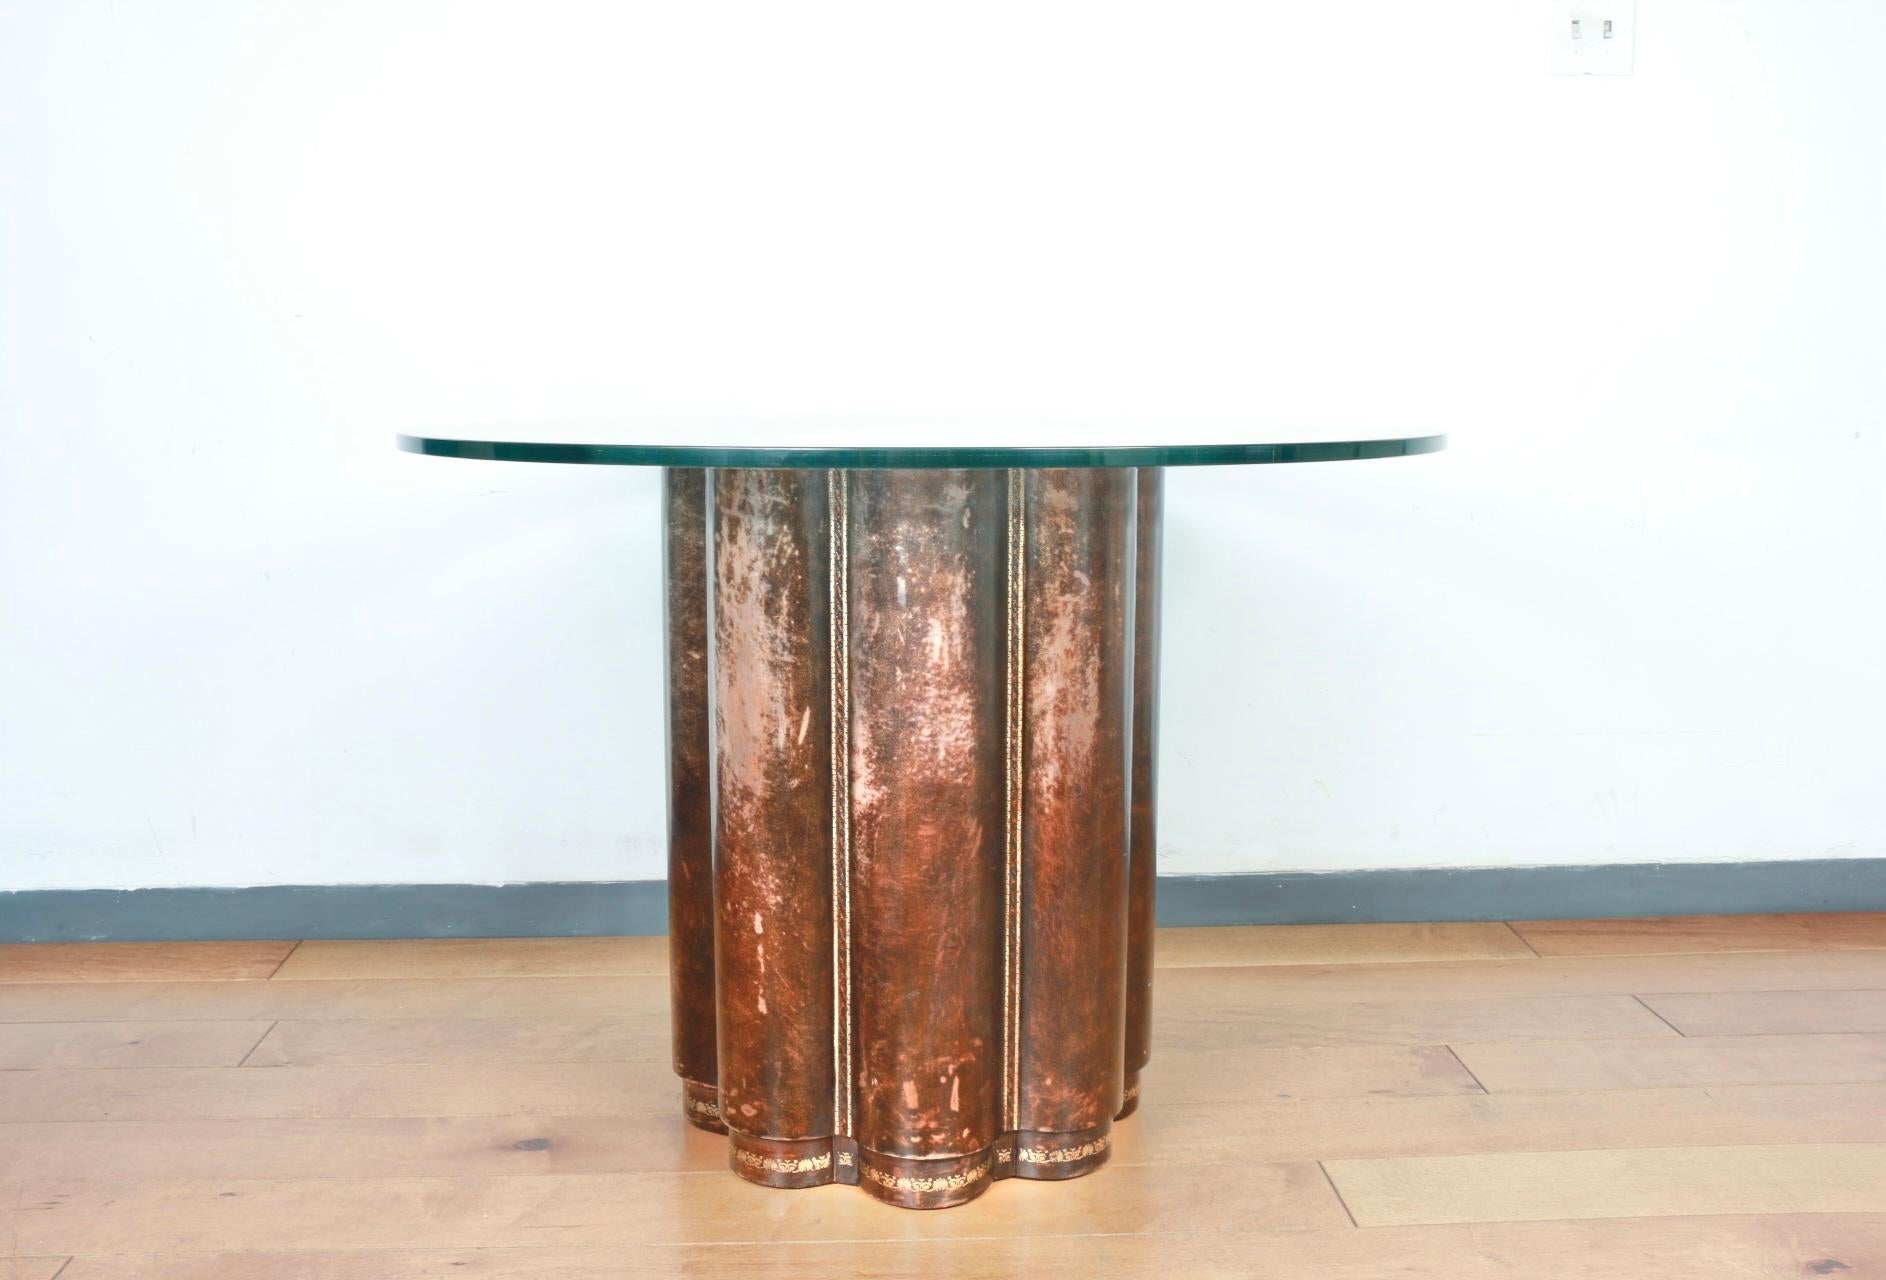 Gorgeous leather accent center table base with round glass top. Leather base has gold accent detail. No damages on base or glass top. Great and elegant for any entrance.